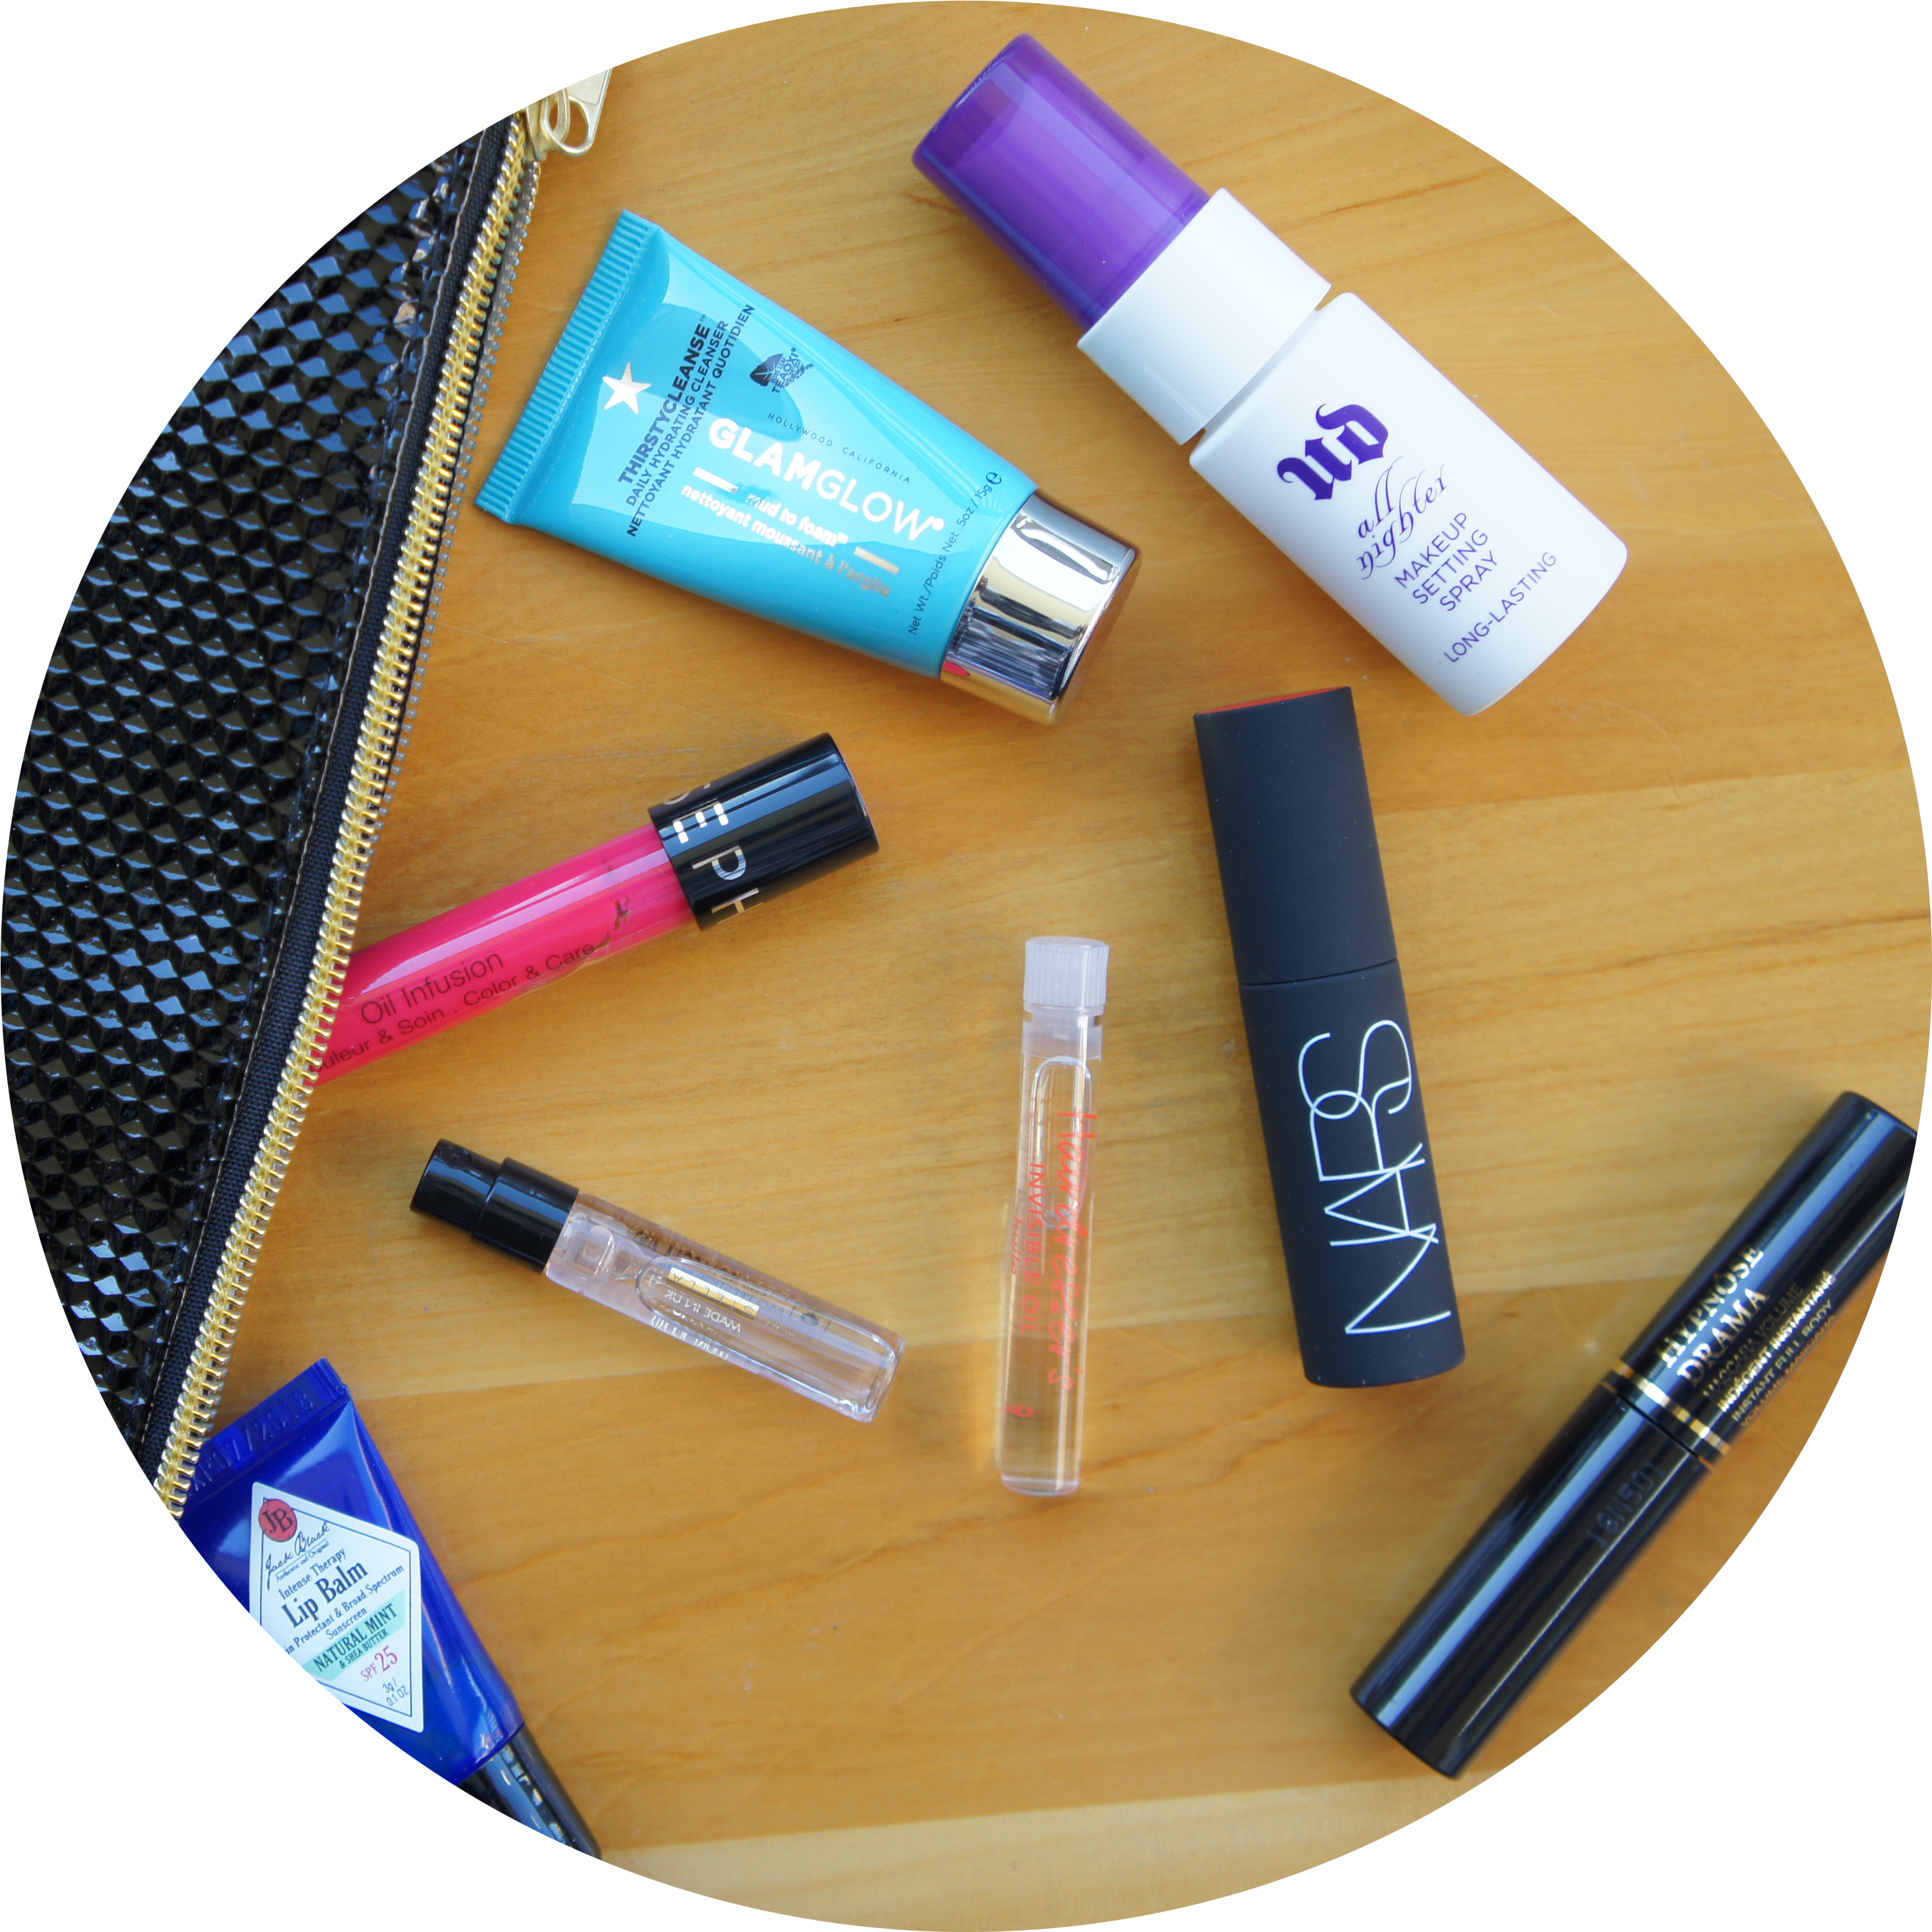 A Group Of Makeup Products On A Table